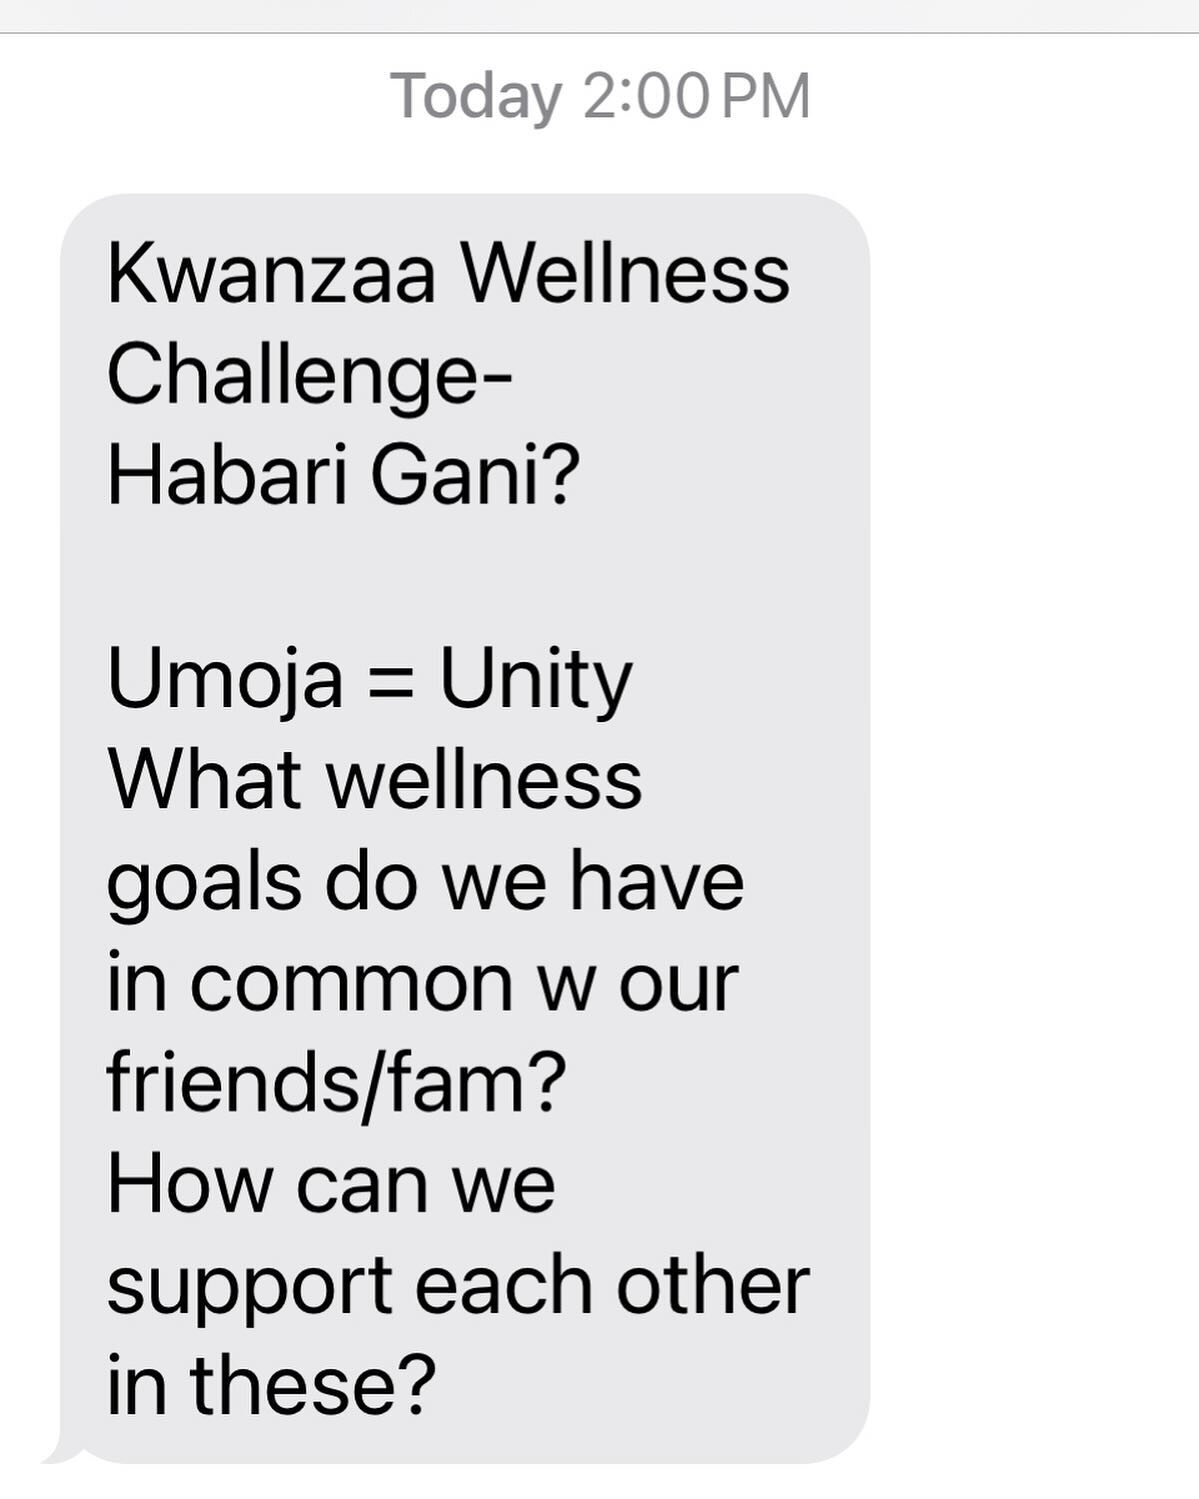 Habari Gani?
Umoja habari gani!

If we look closely enough, everything in our lives interacts with our health and wellness.

This week, in our #dailywellness Text Thread, we&rsquo;re having a Kwanzaa Wellness Challenge. 

For 7 days, let&rsquo;s expl